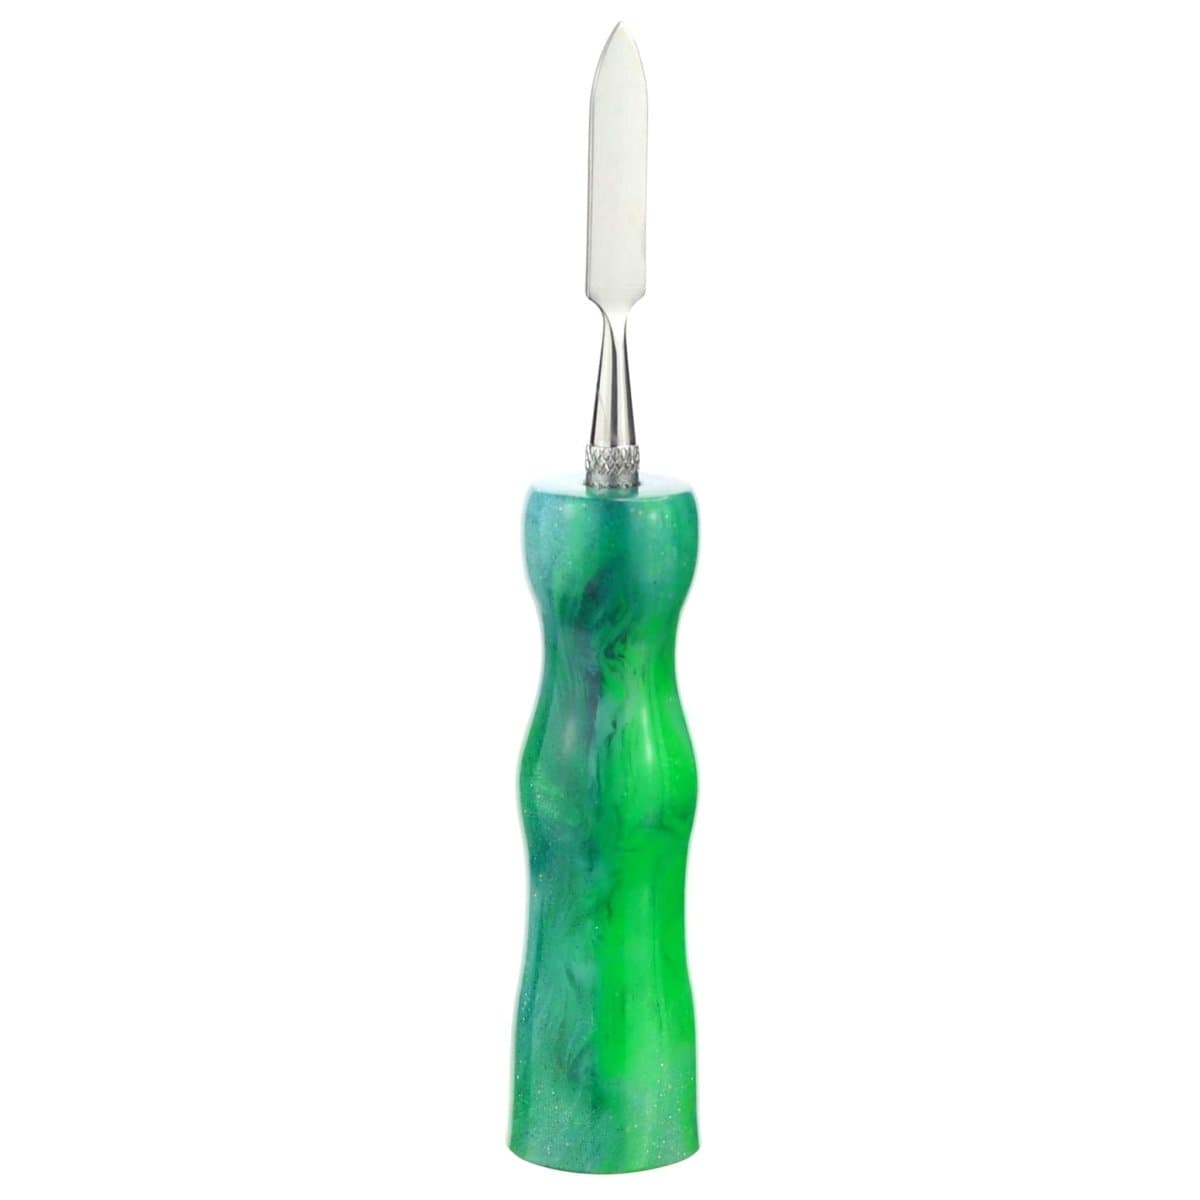 Galactic Crafts Accessory Design 5- Pointed Space Slime Resin Dab Tool